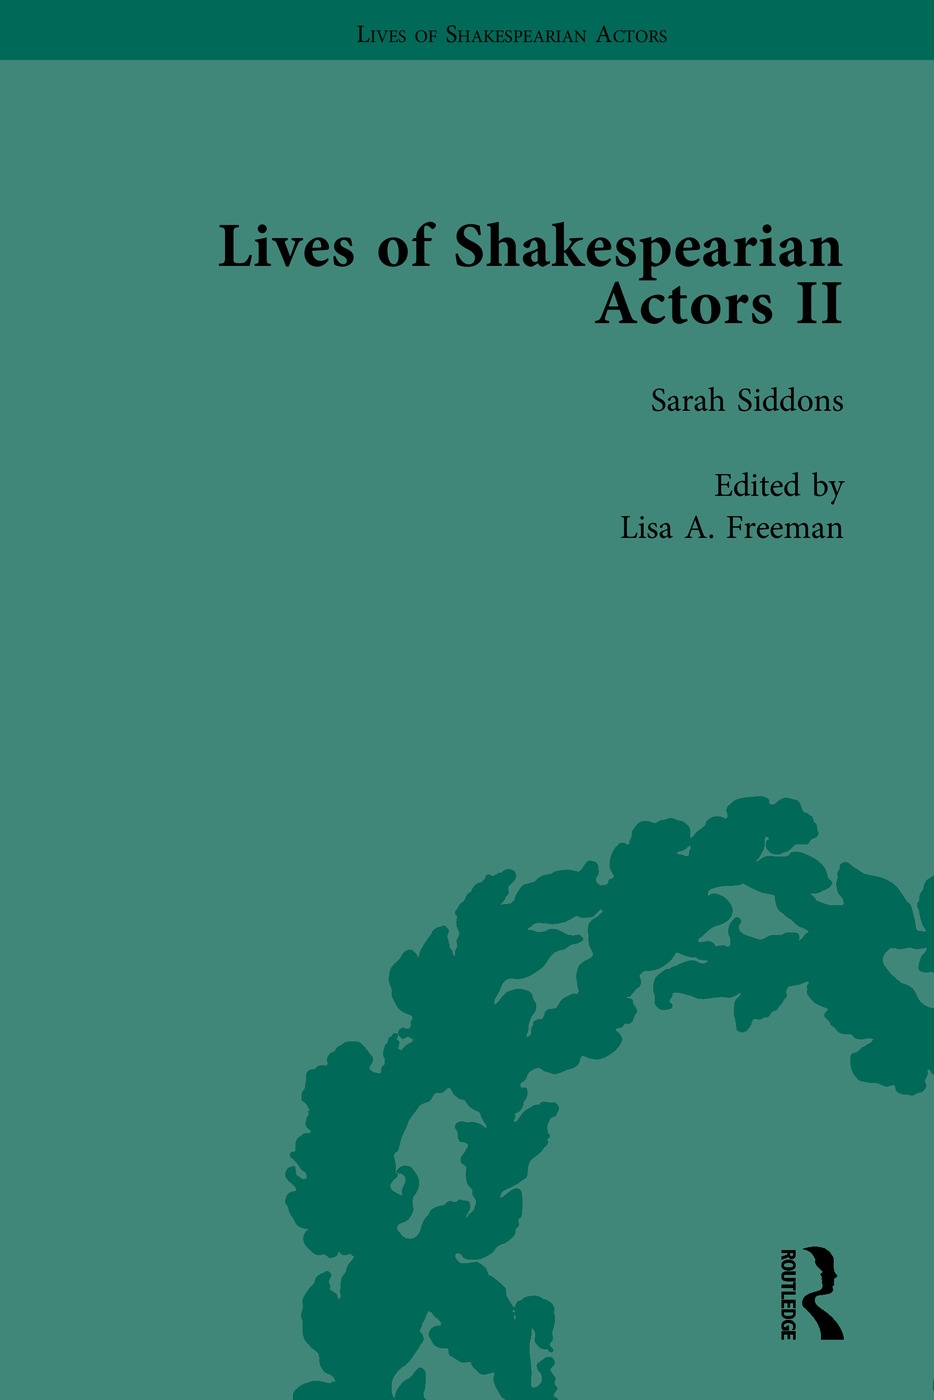 Lives of Shakespearian Actors II: Edmund Kean, Sarah Siddons and Harriet Smithson by Their Contemporaries